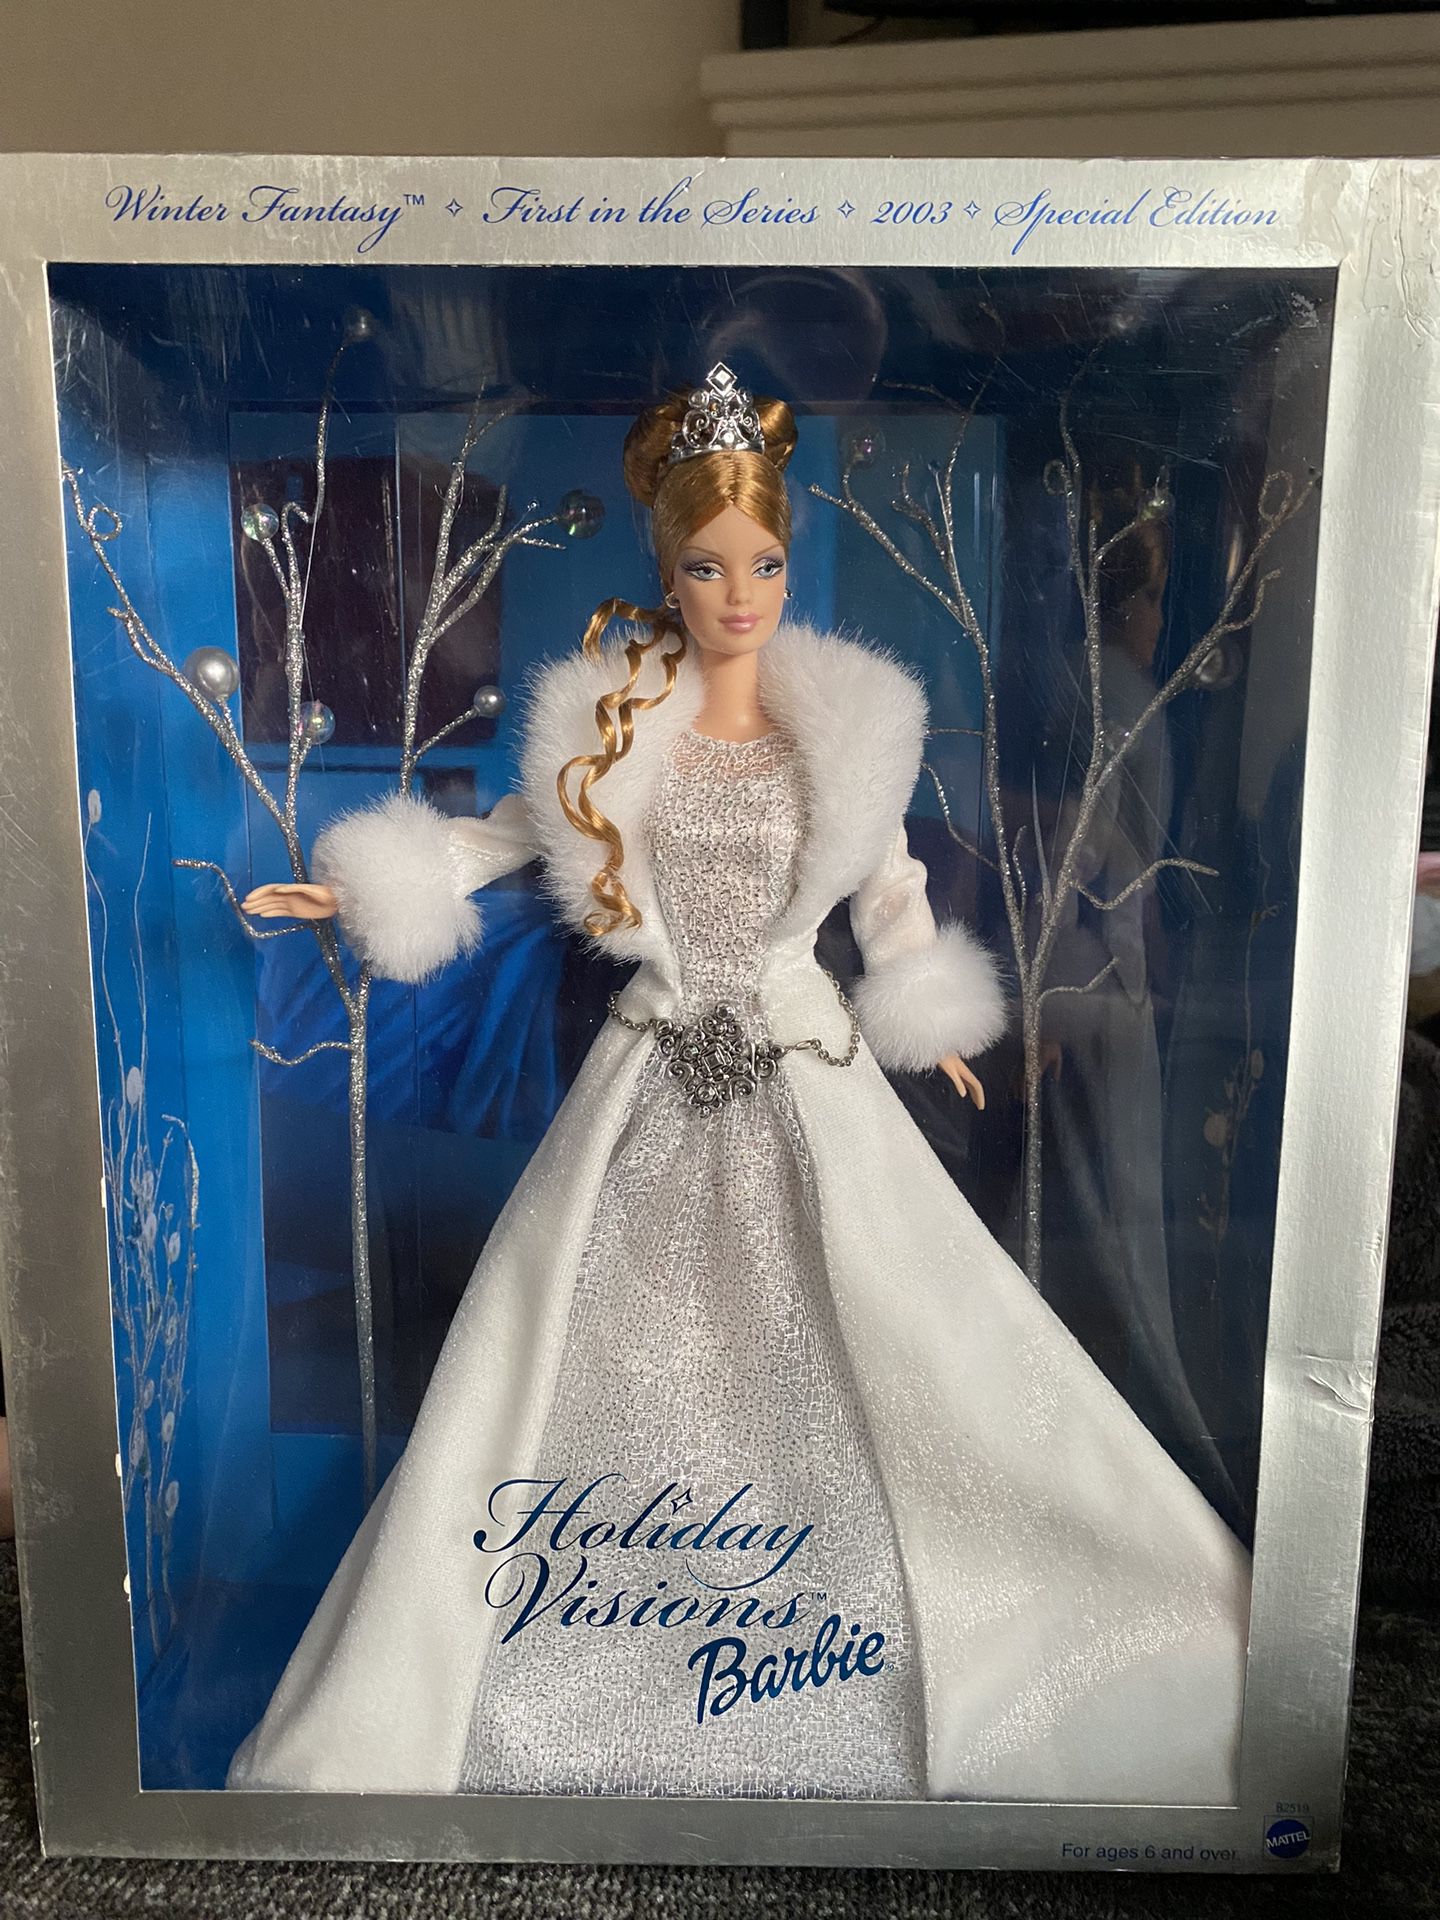 2003 WINTER FANTASY SPECIAL EDITION HOLIDAY VISIONS BARBIE 